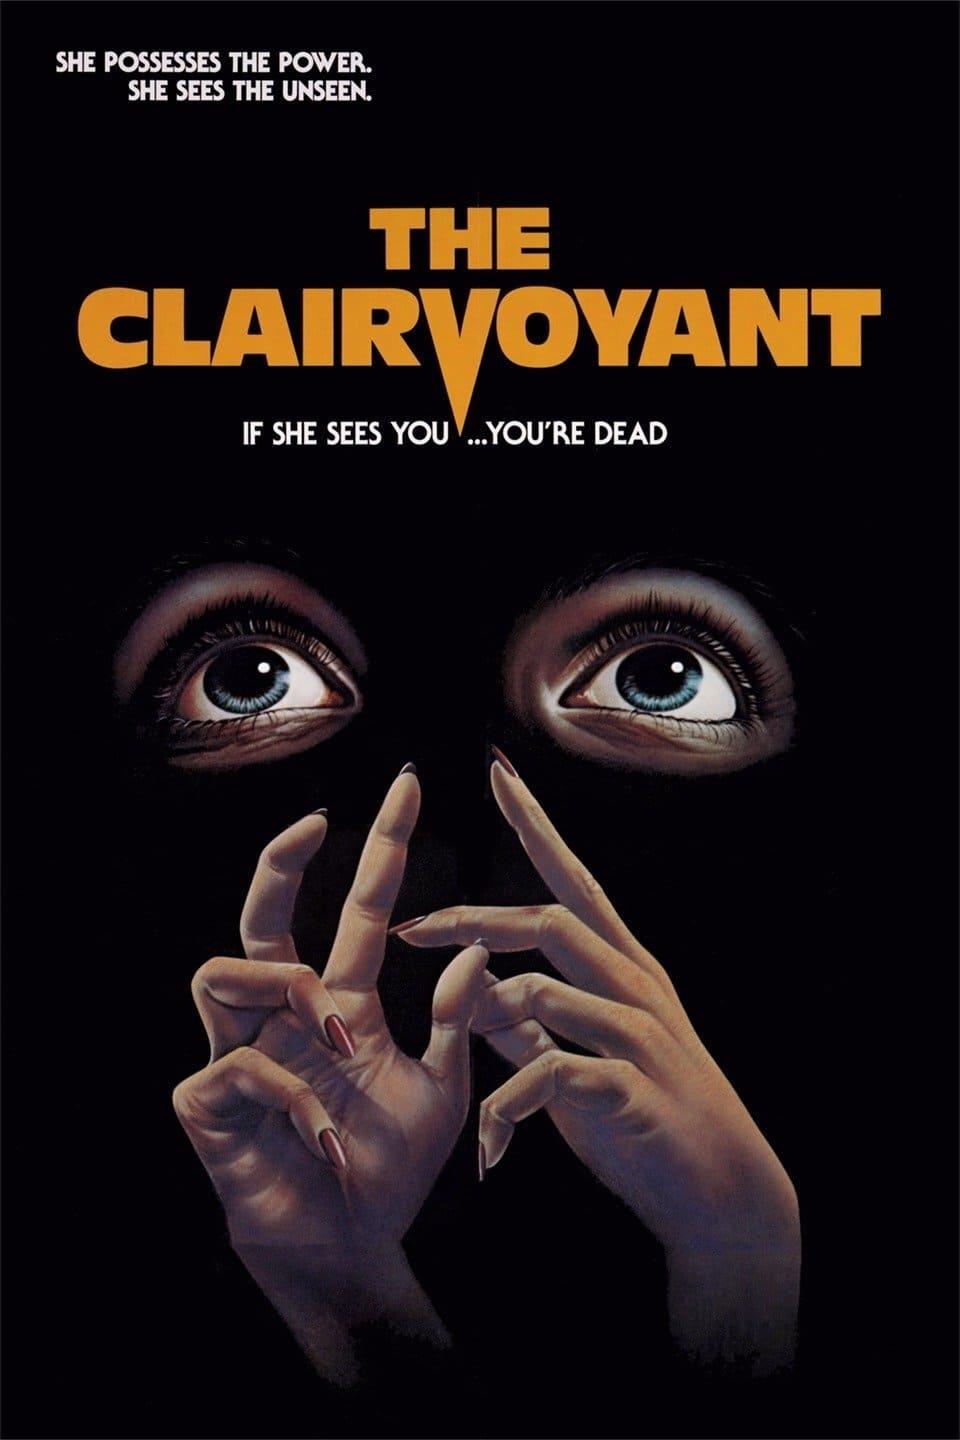 The Clairvoyant poster